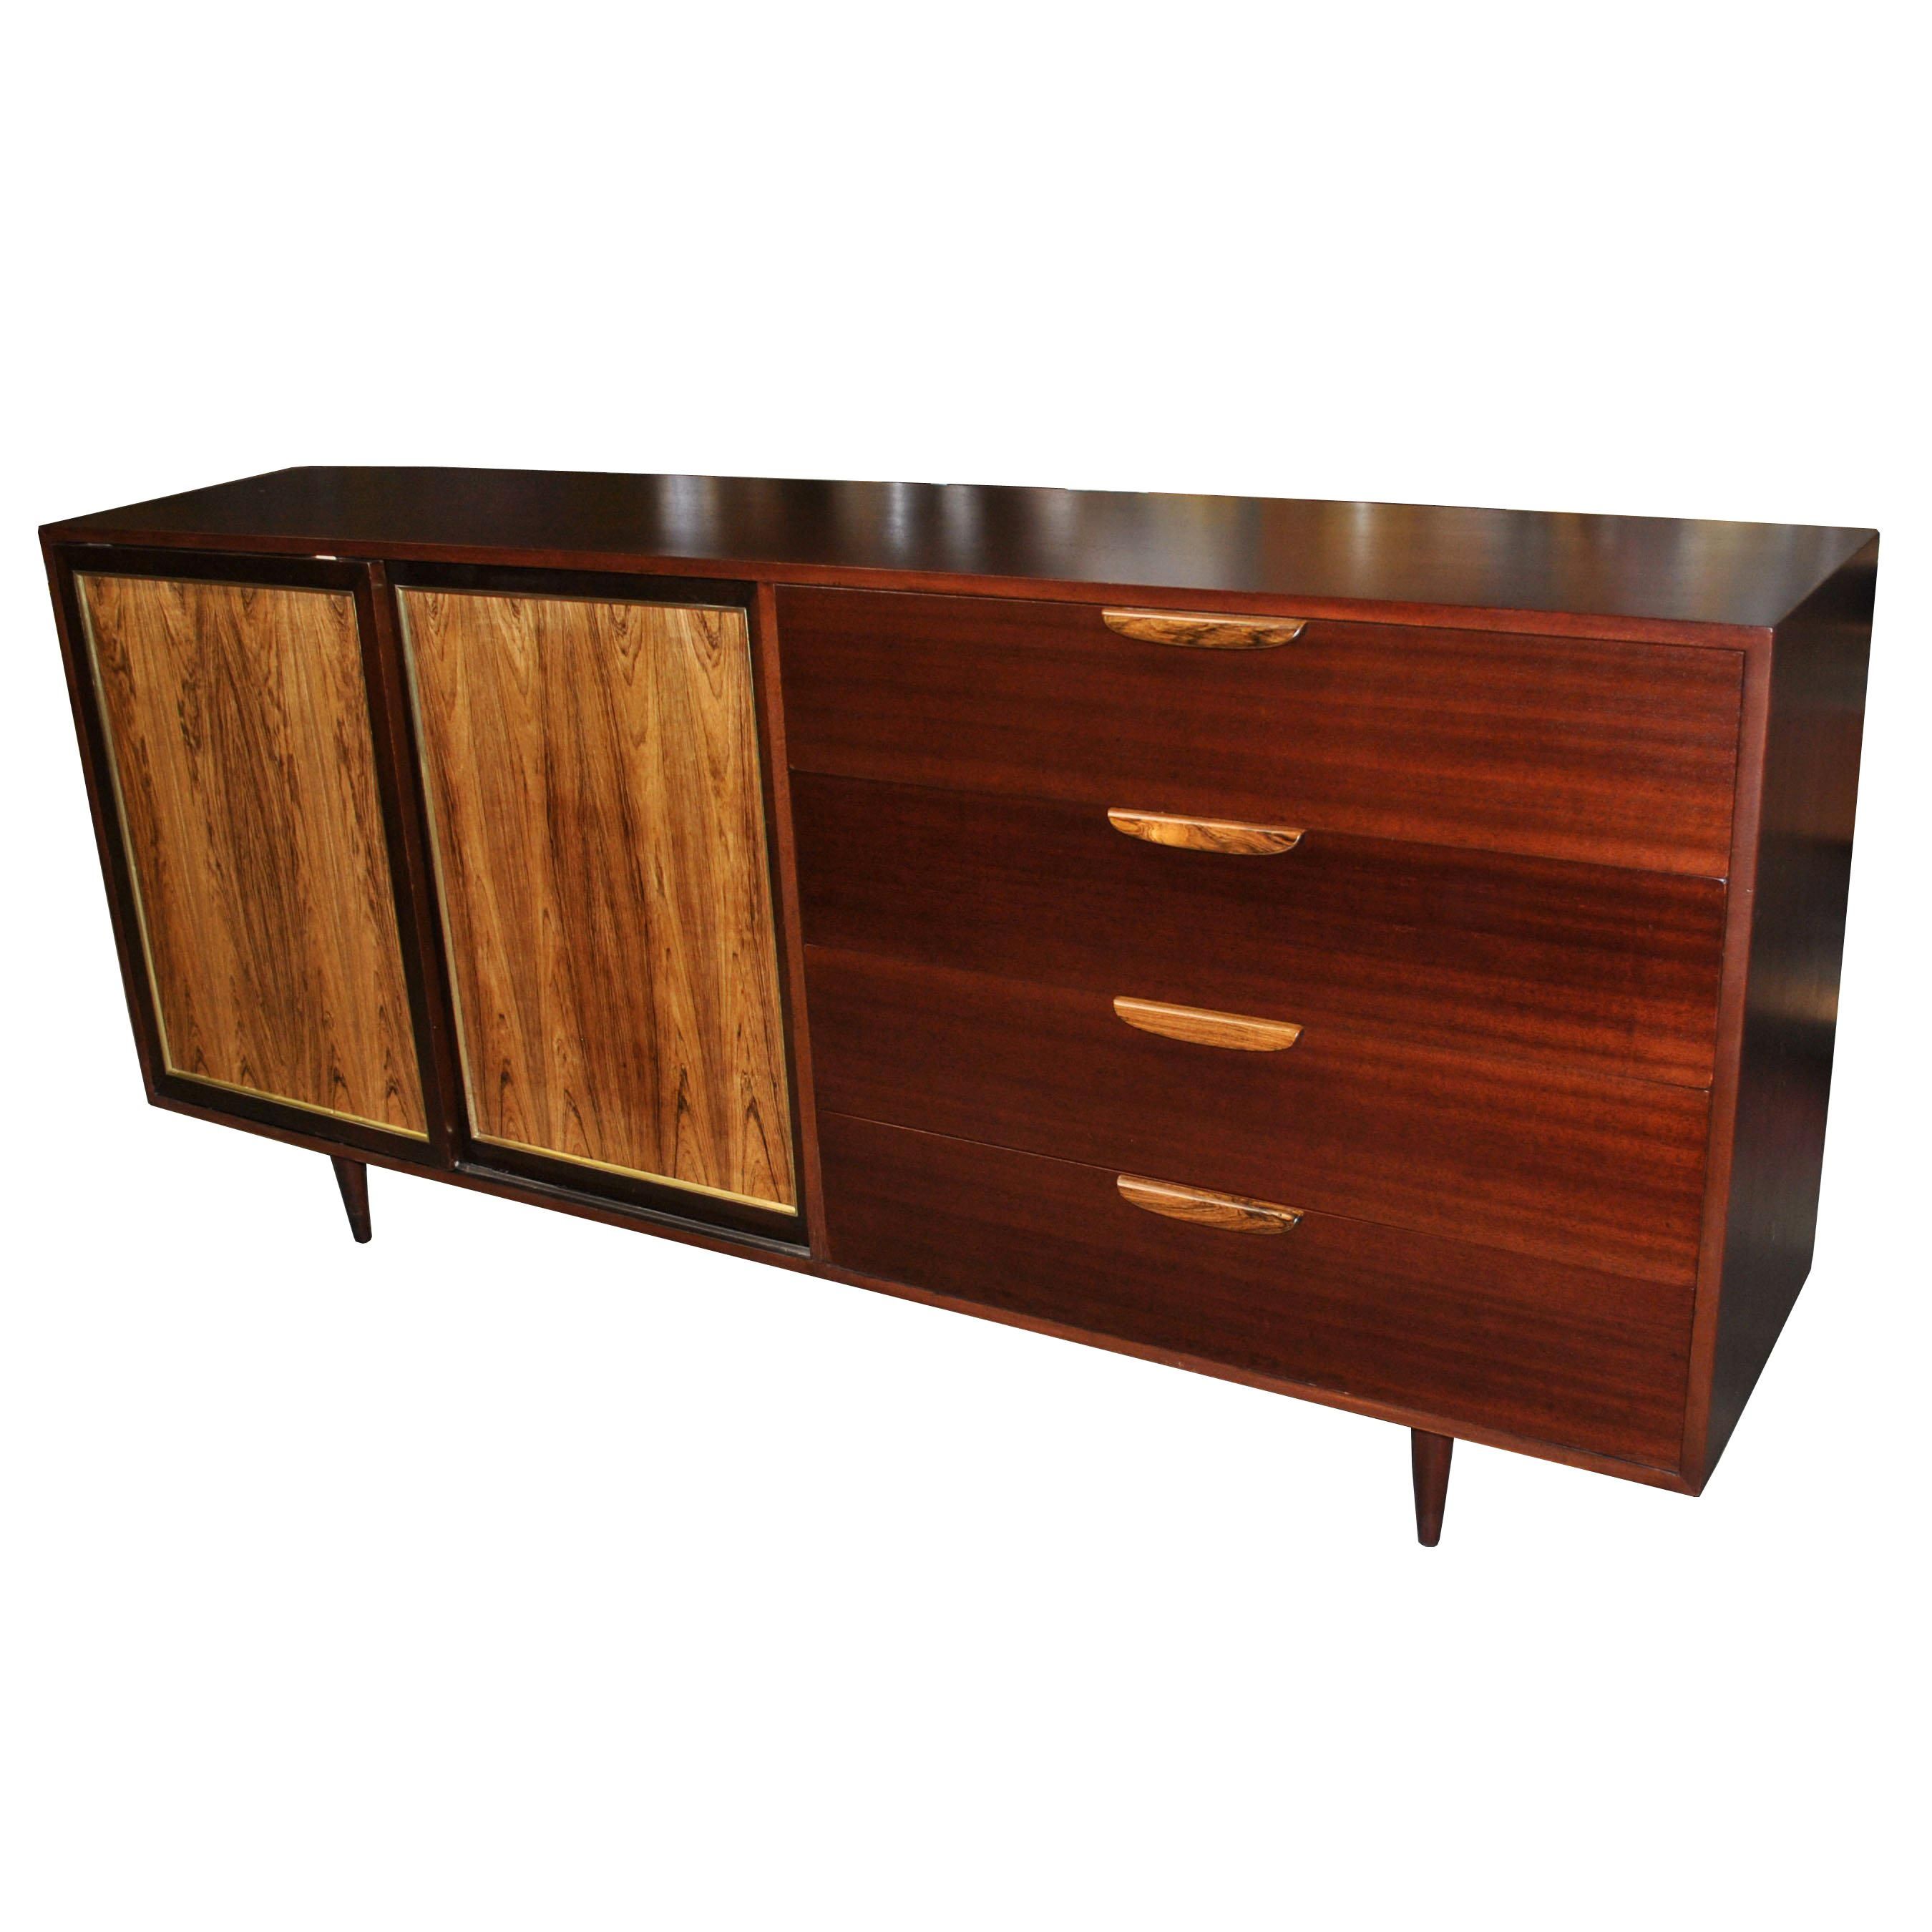 Vintage Florence Knoll Credenza With Graffiti Reimagined Intended For Retro Holistic Credenzas (View 8 of 30)